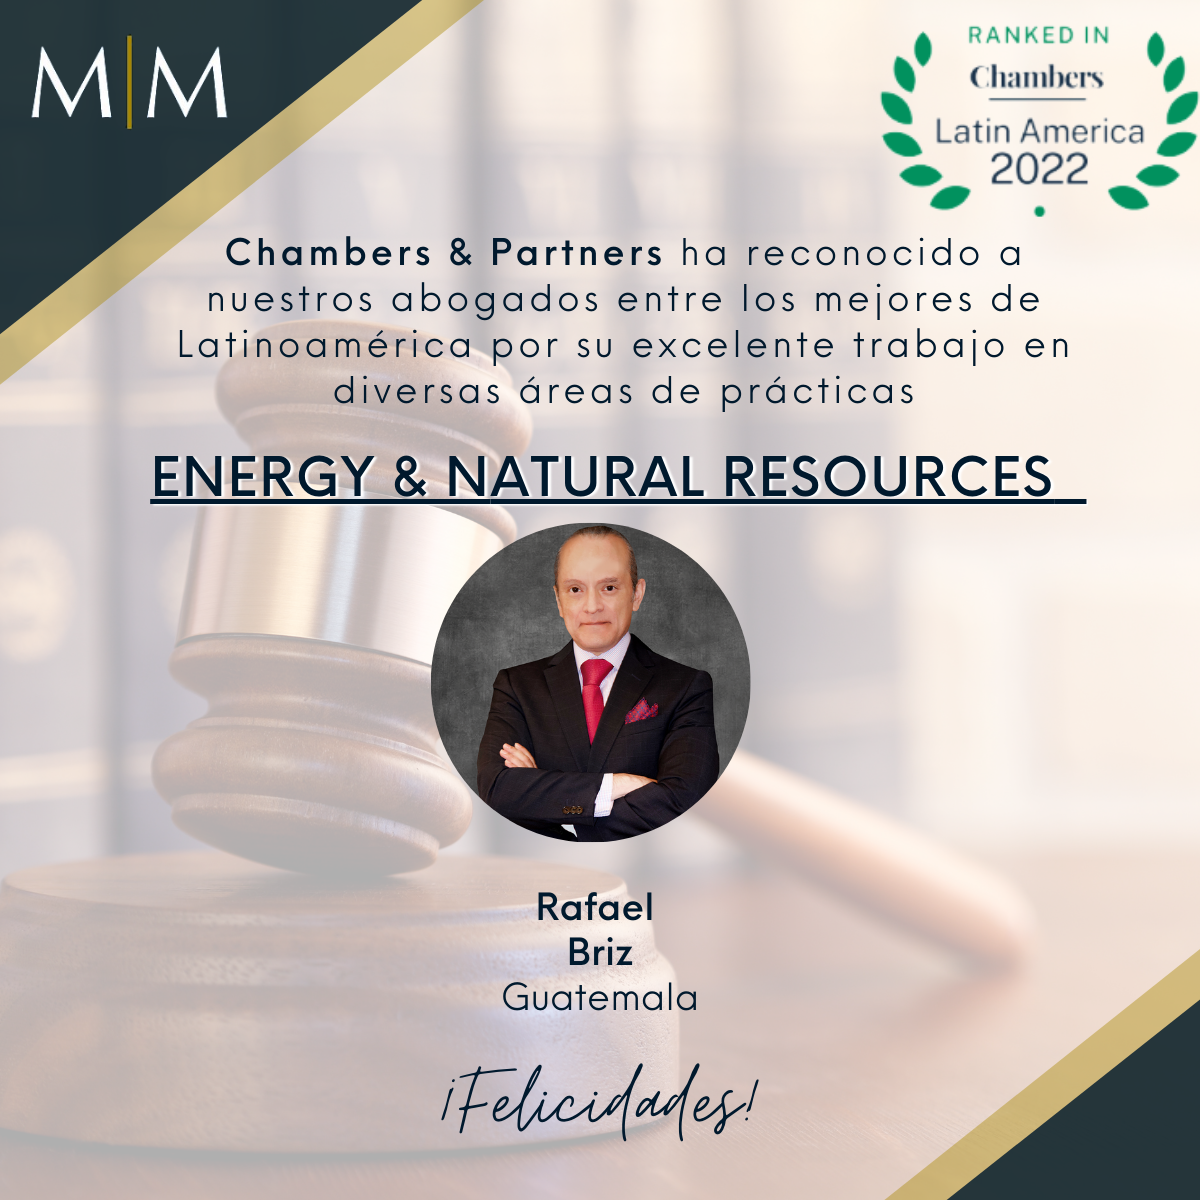 You are currently viewing M&M Reconocimiento- Chambers & Partners “Energy & Natural Resources”